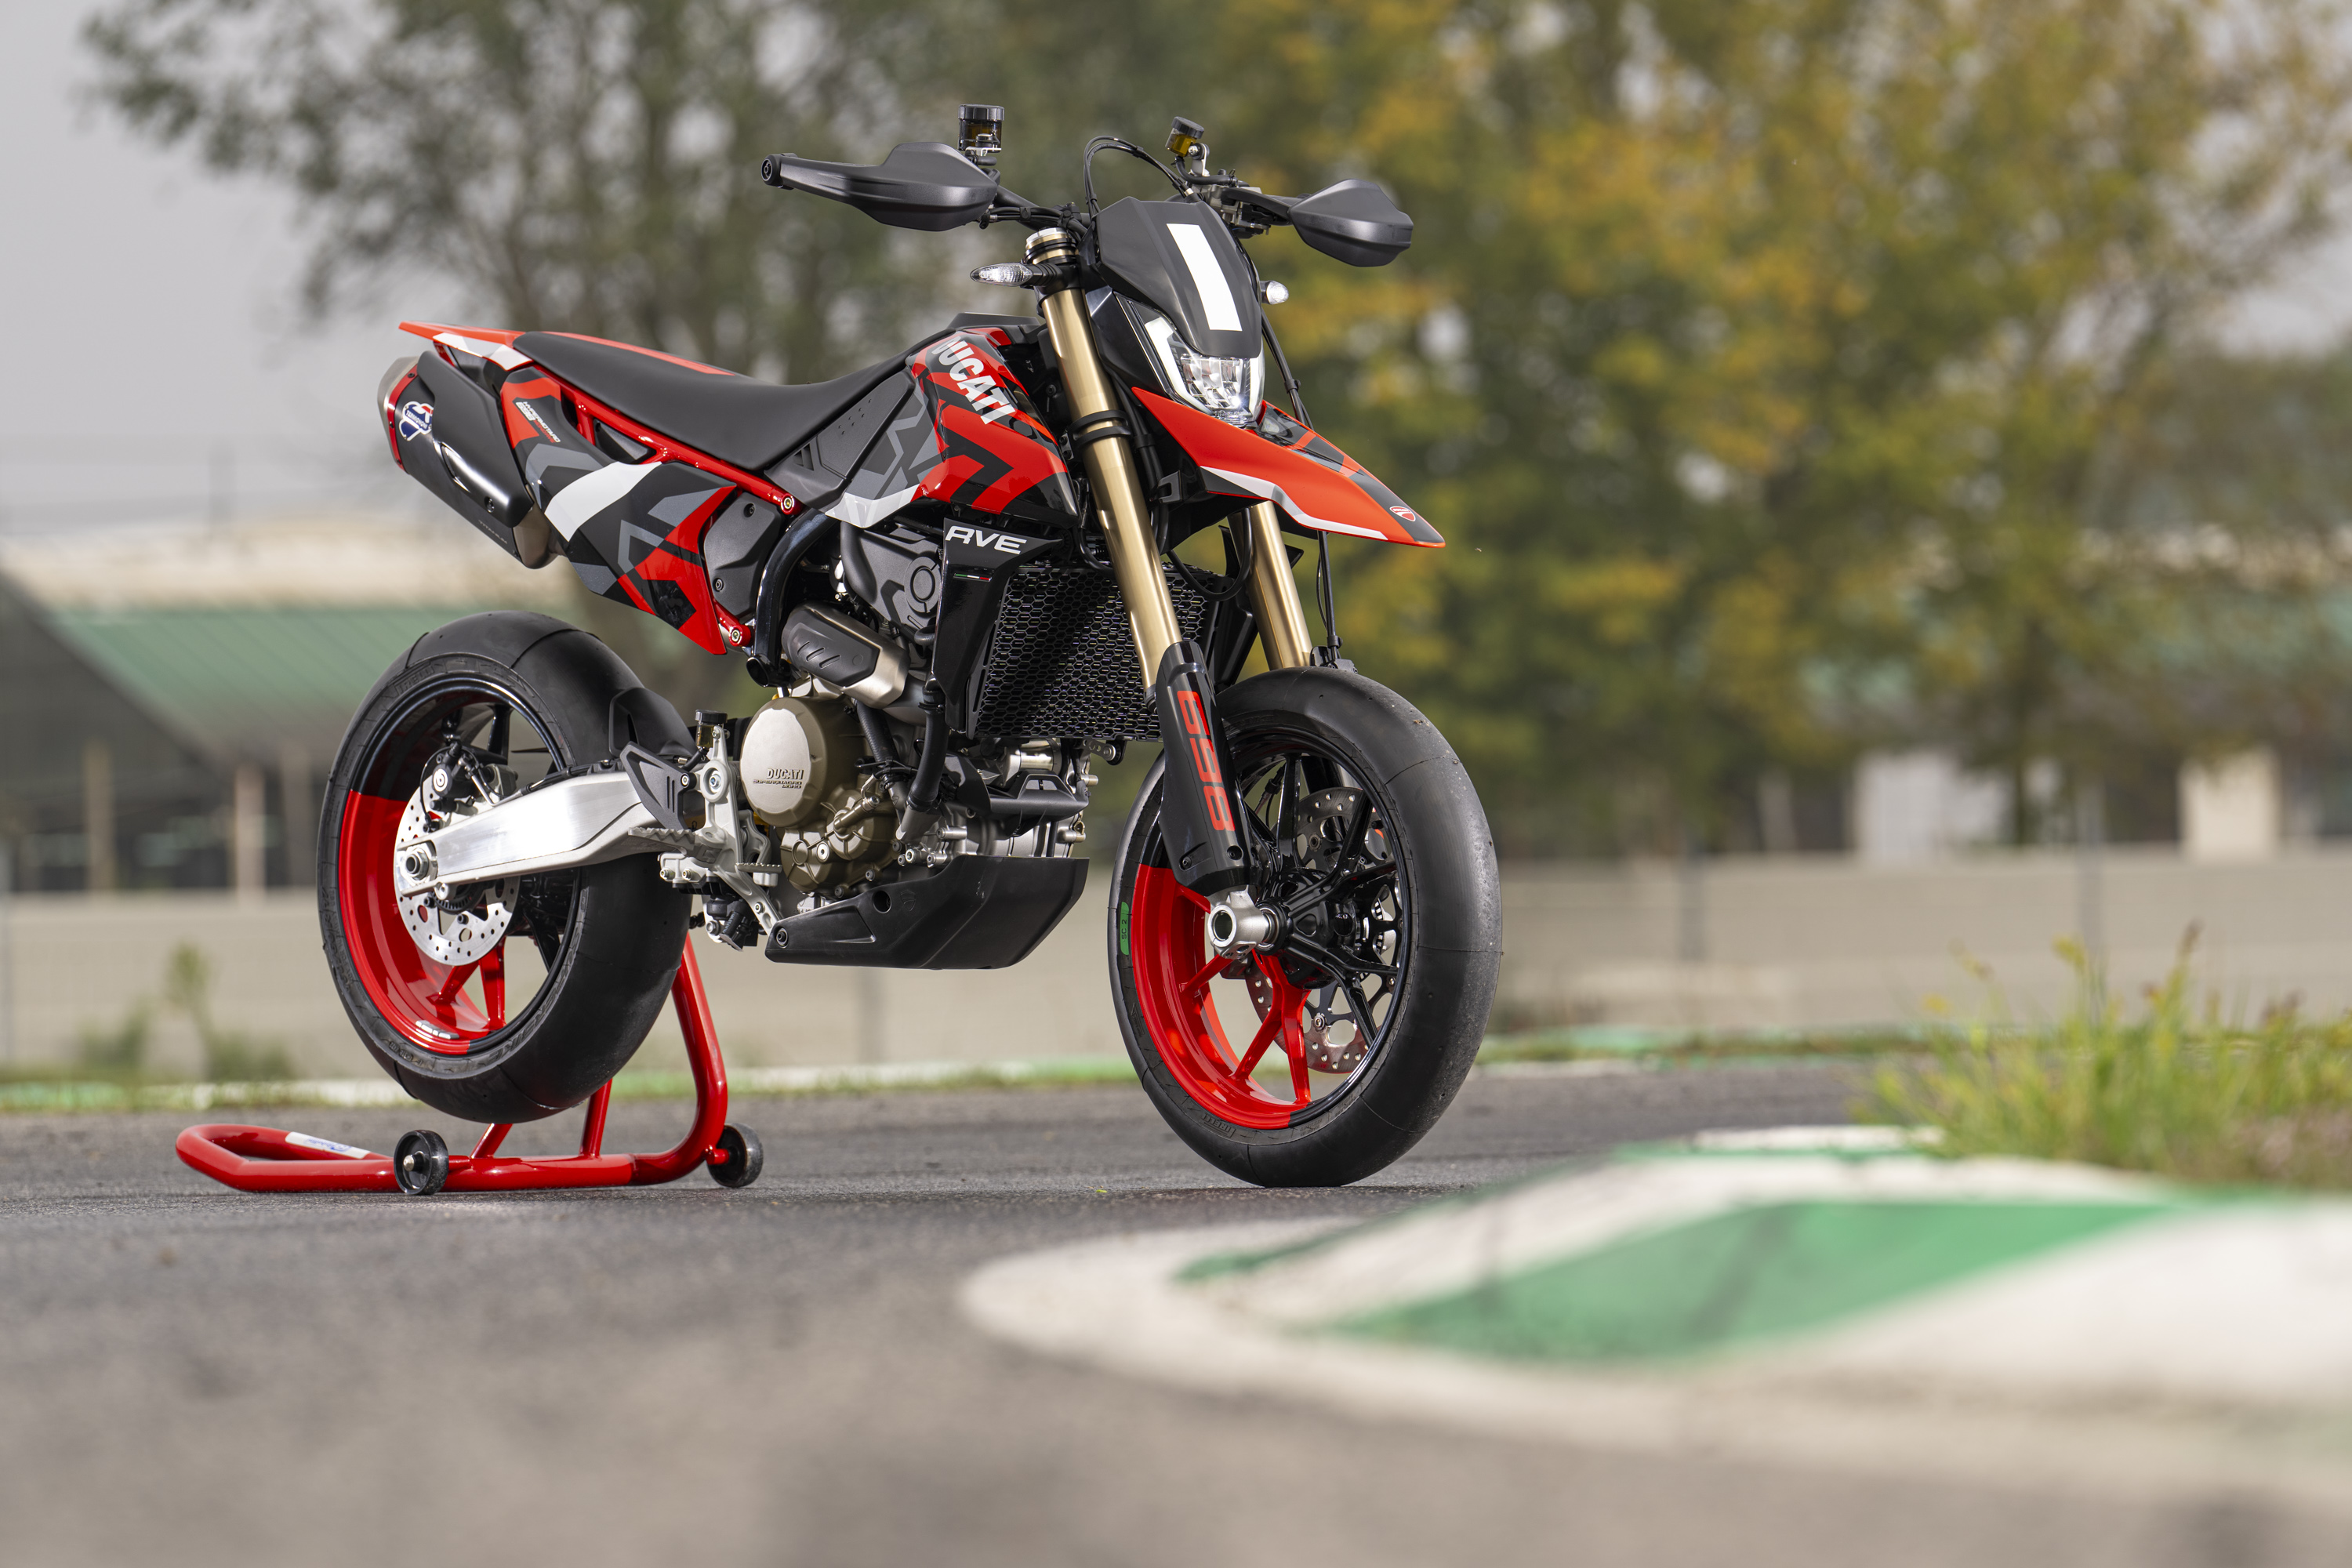 The Ducati Hypermotard 698 Mono is the most extreme sin